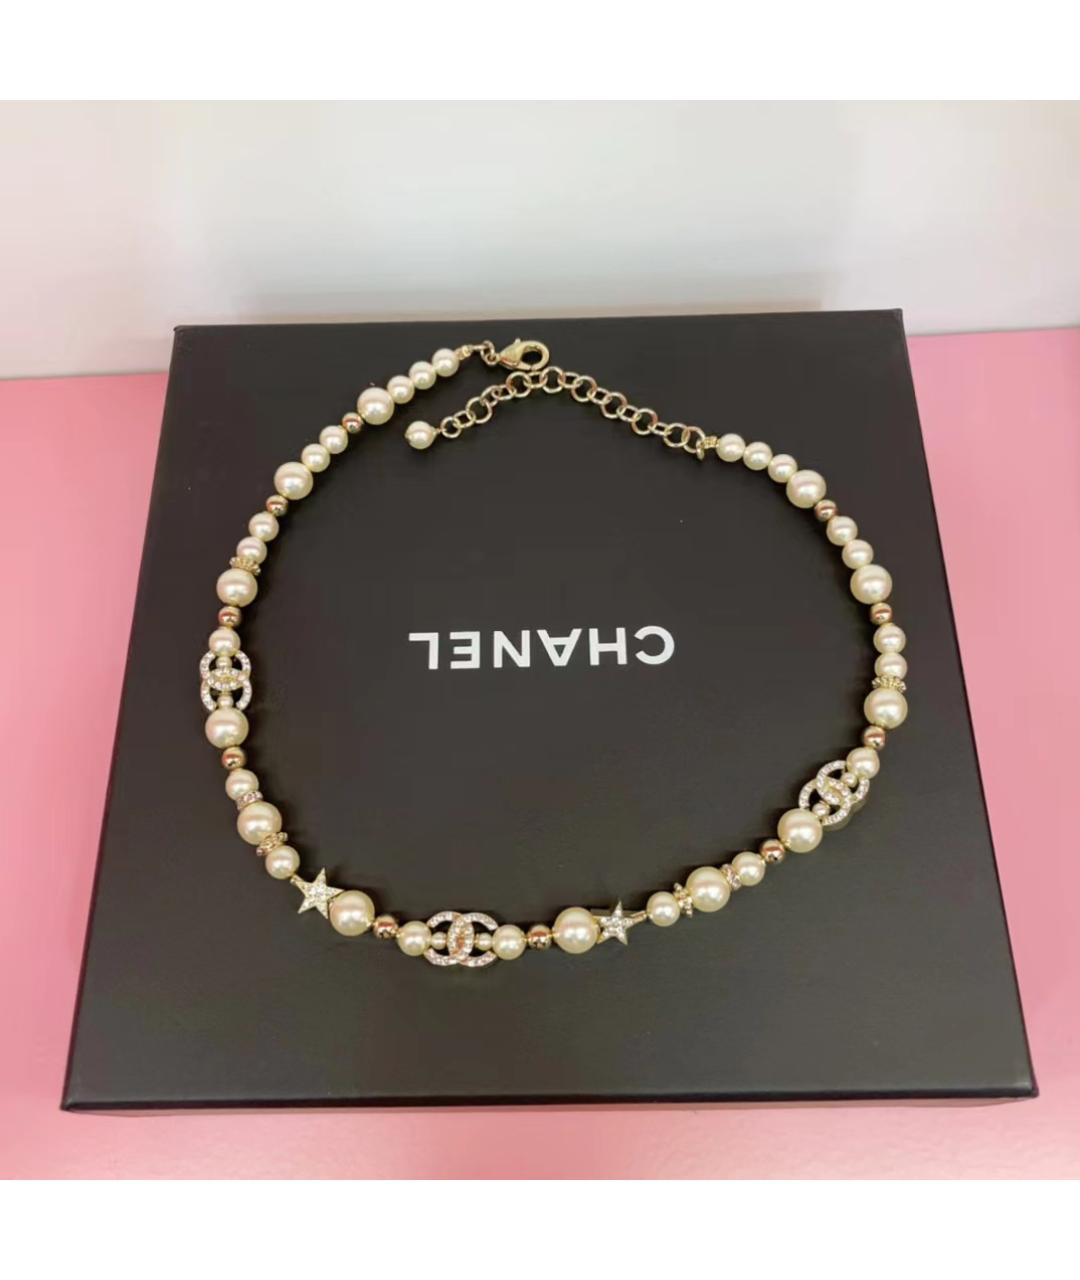 CHANEL PRE-OWNED Колье, фото 3